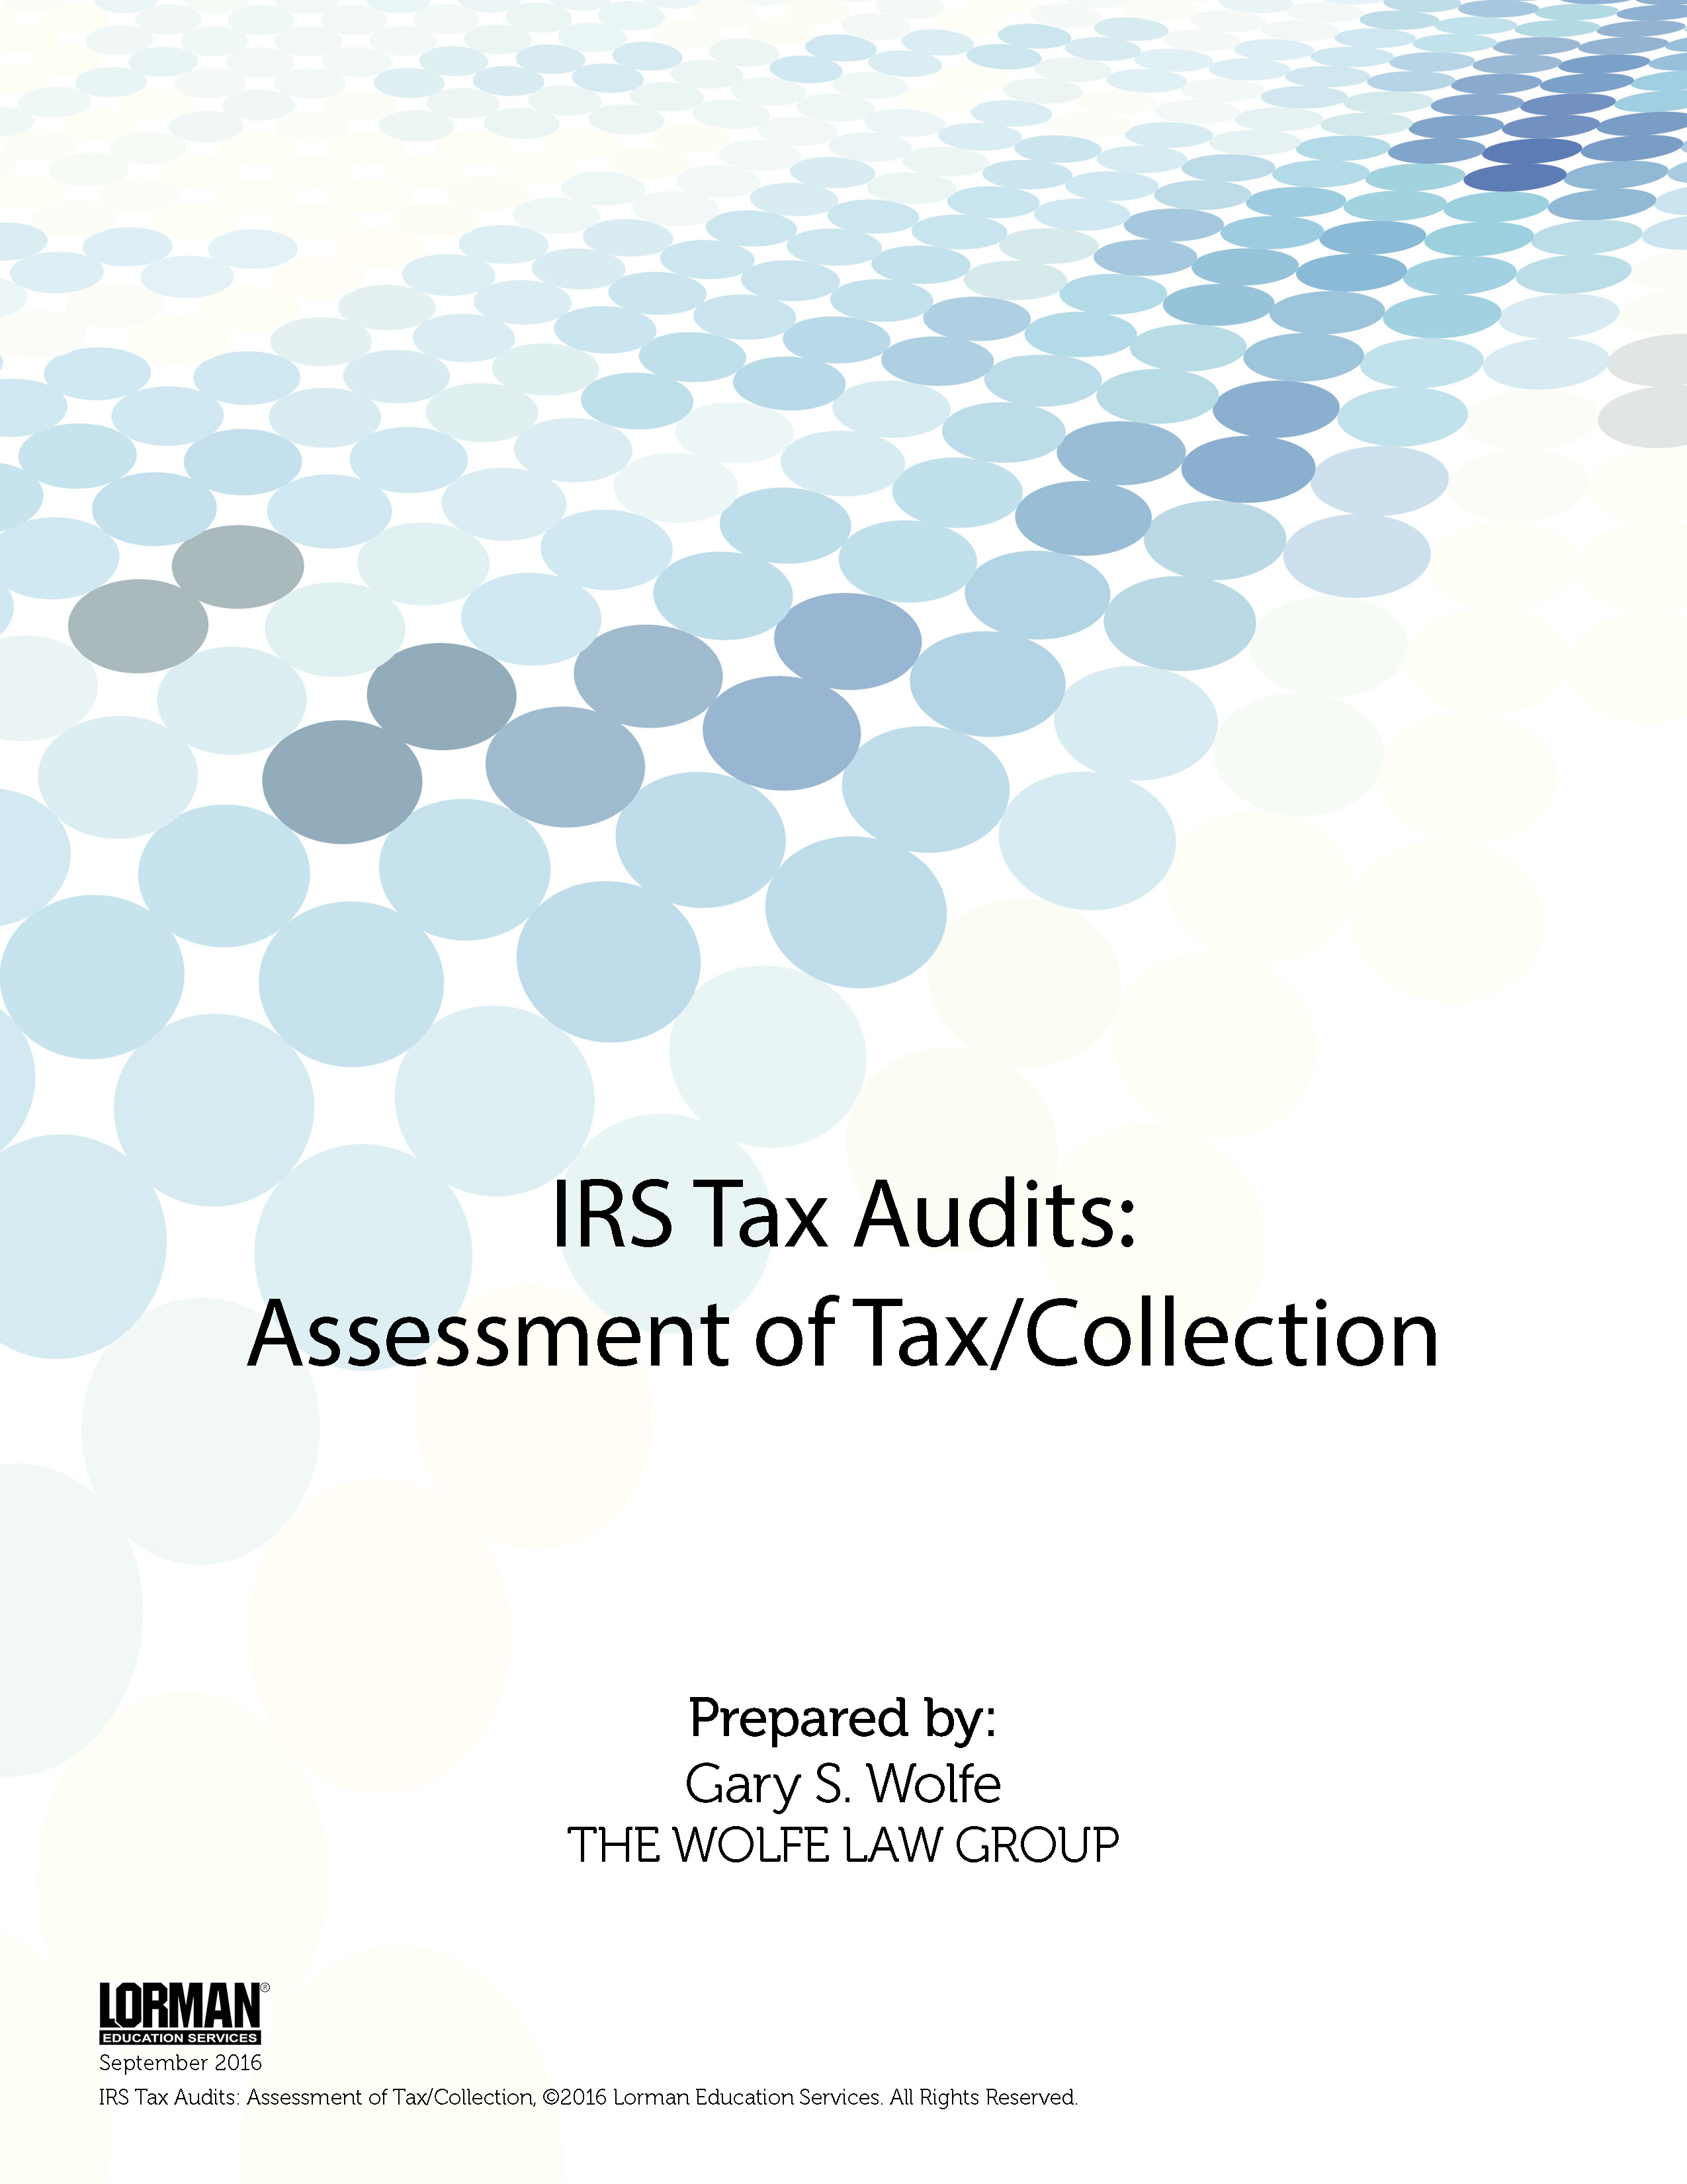 IRS Tax Audits - Assessment of Tax-Collection